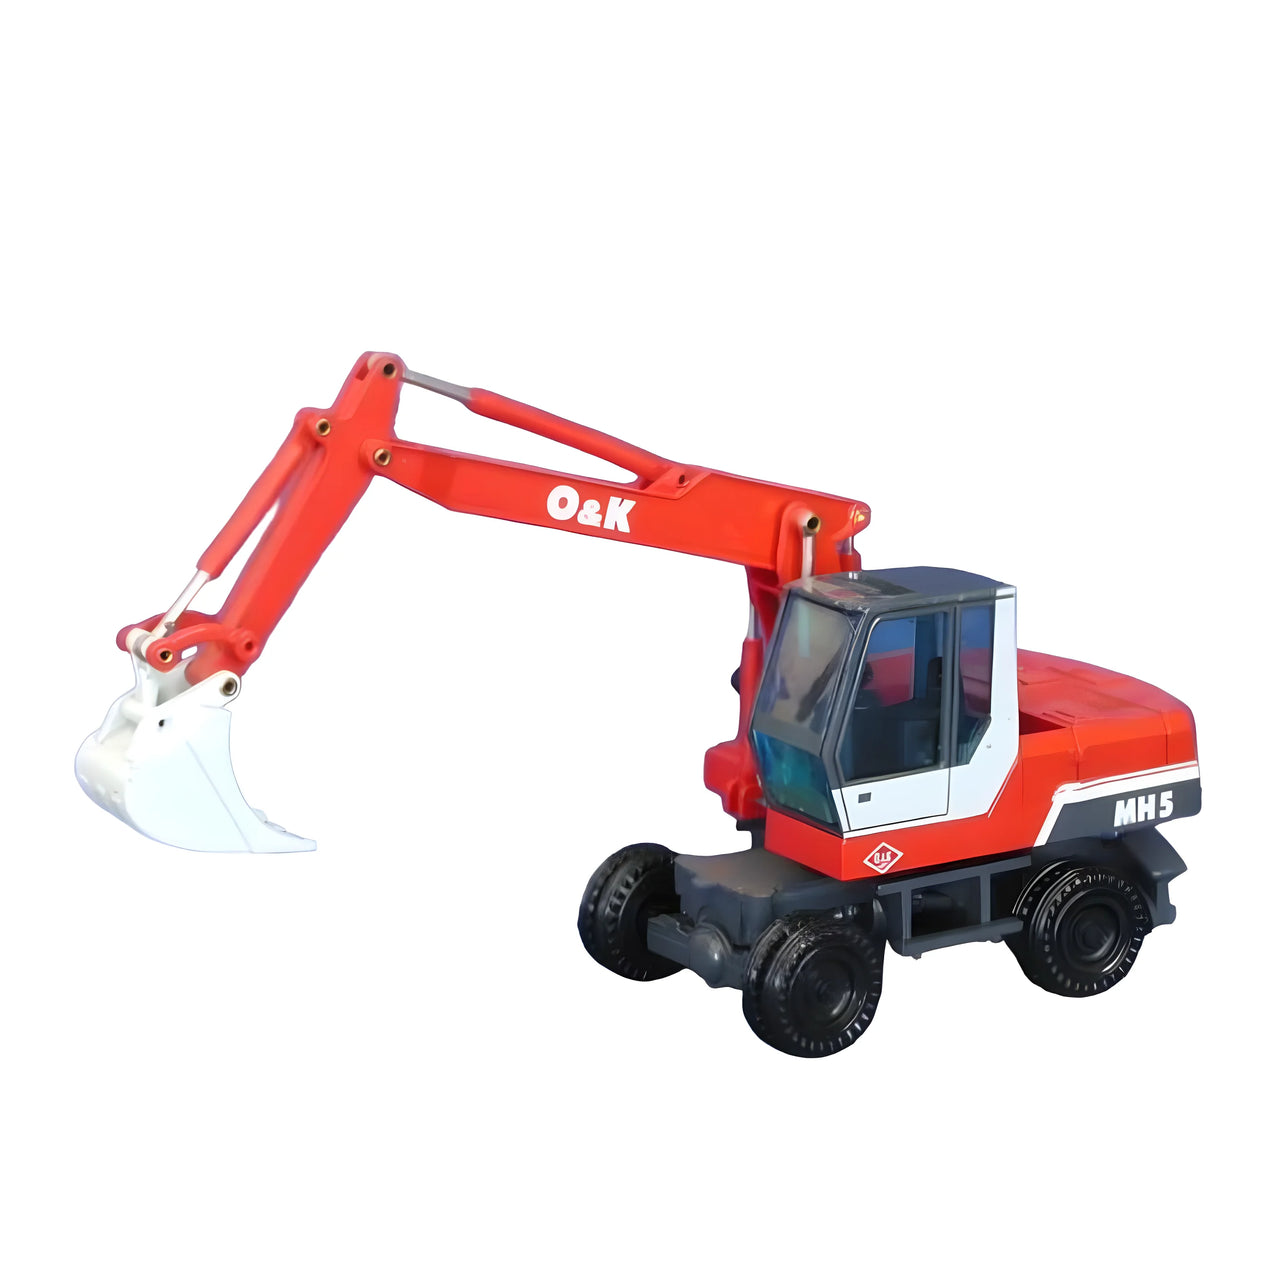 333 O&amp;K MH5 Wheeled Excavator 1:50 Scale (Discontinued Model)